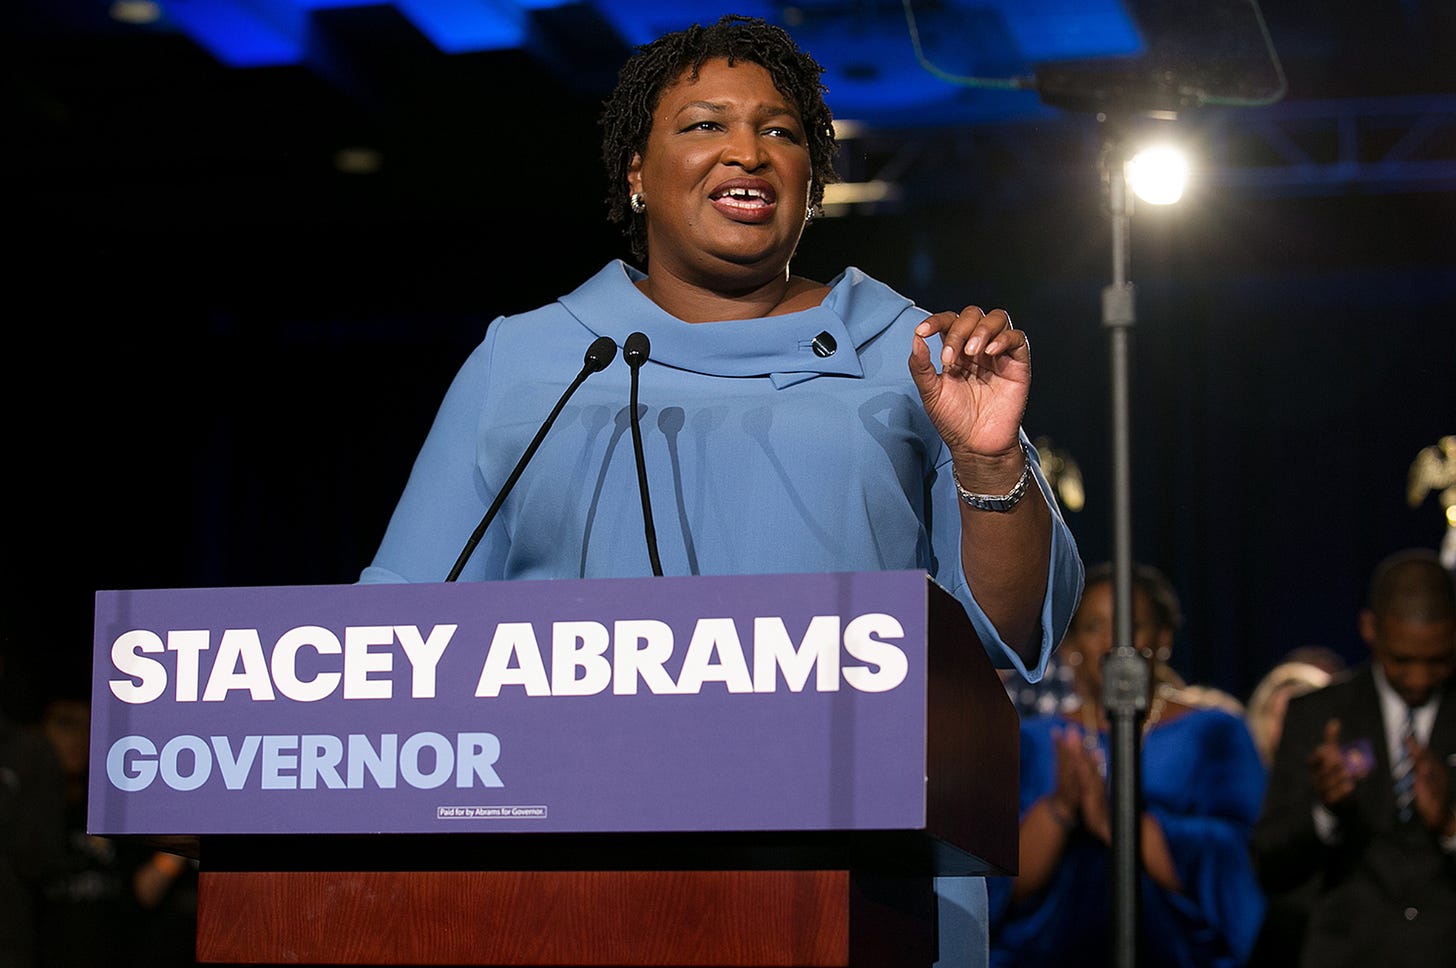 Stacey Abrams is giving a speech during her gubernatorial campaign. She's in a blue dress behind a podium at night.